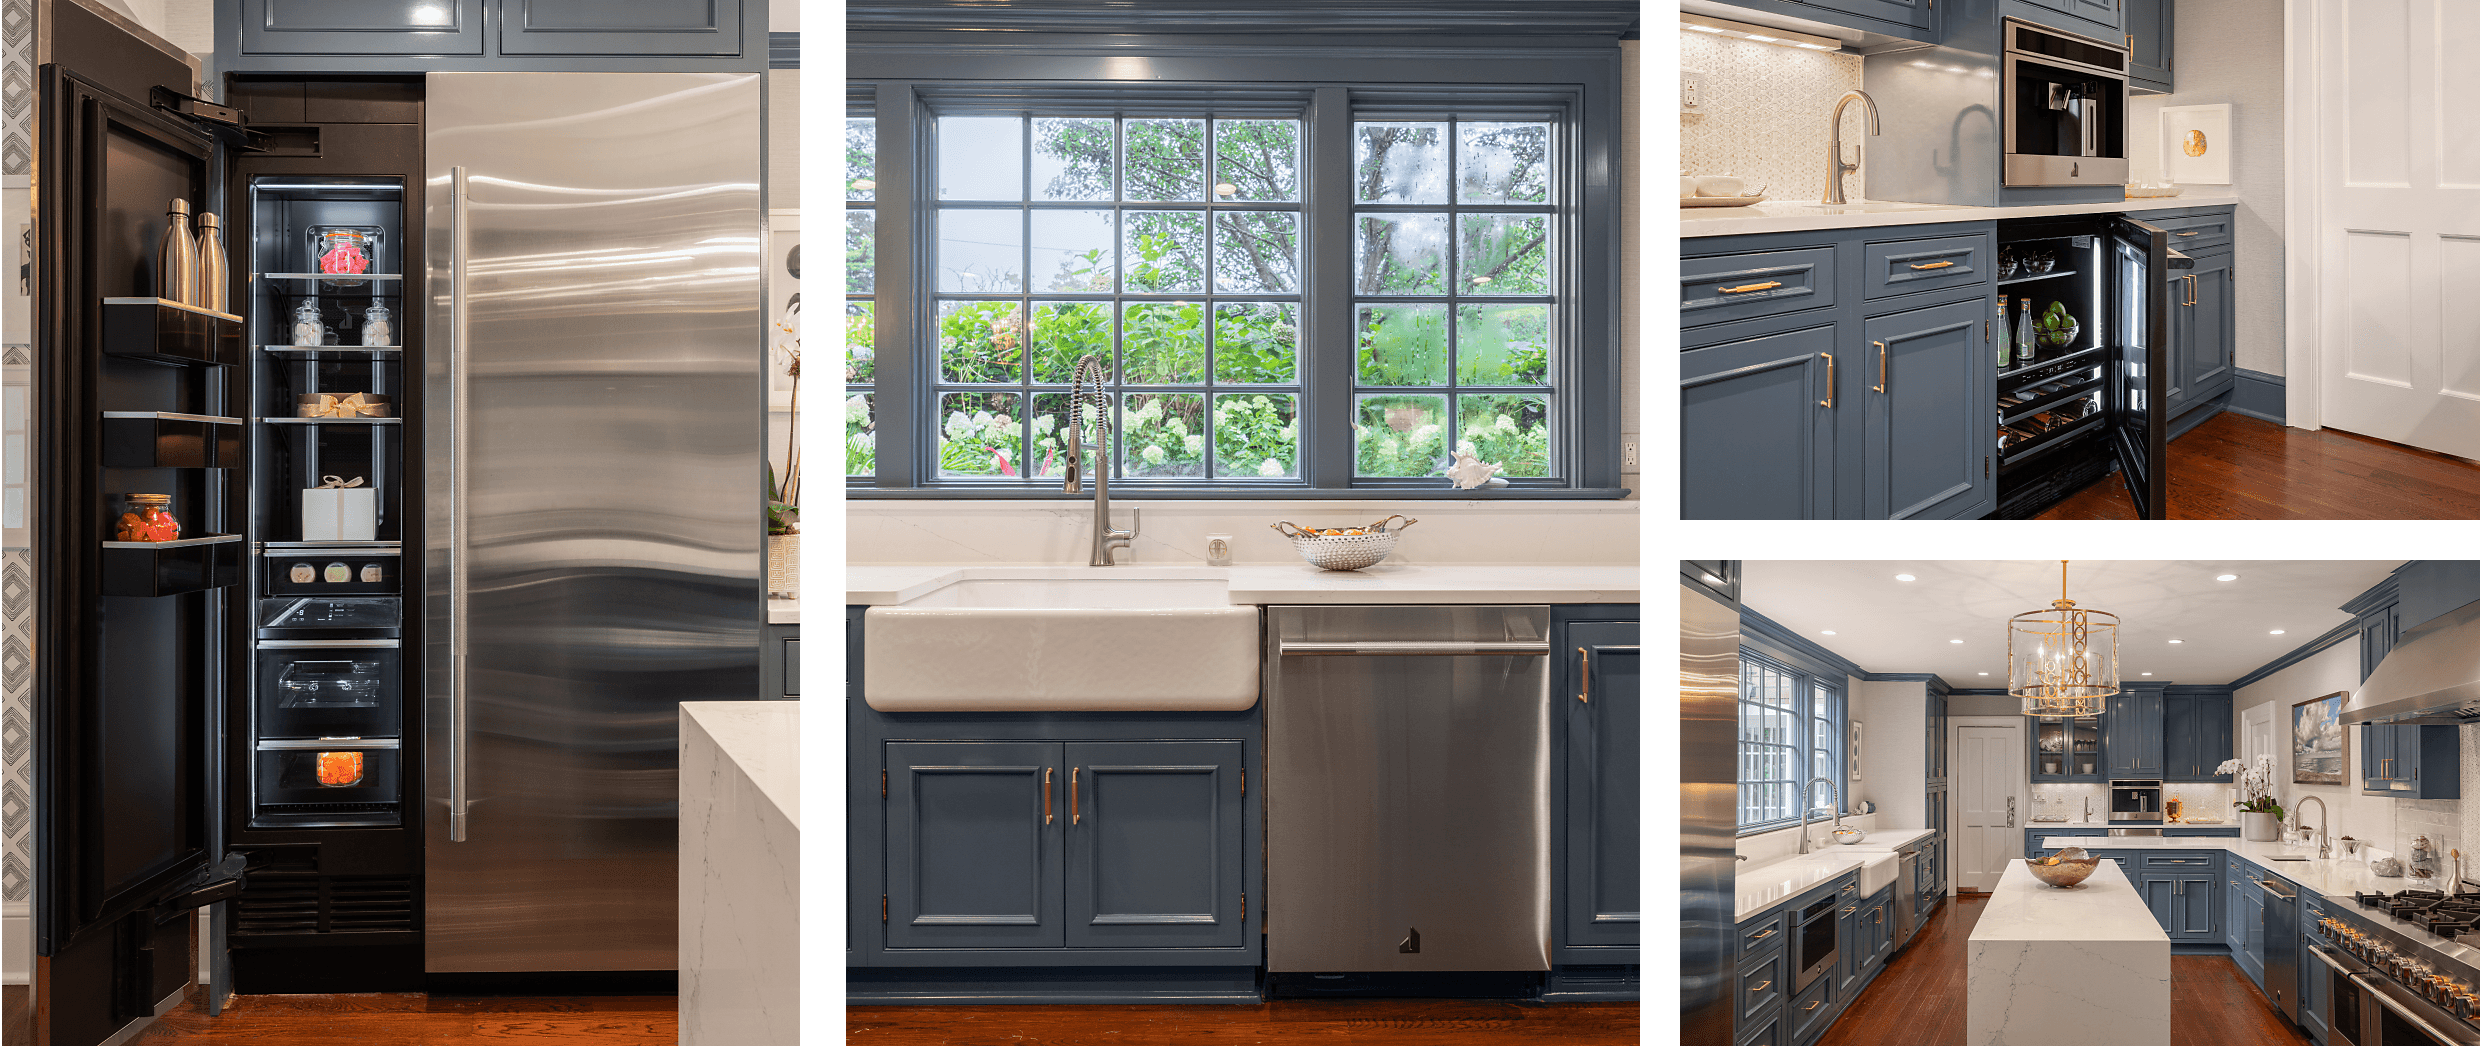 A collage of images including a JennAir® RISE™ Column Refrigerator and Freezer set; a JennAir® RISE™ Dishwasher next to a white farmhouse apron sink in a kitchen with blue cabinets; JennAir® RISE™ Built-In Coffee above an open JennAir® RISE™ Beverage Center; a white and blue kitchen with JennAir® appliances.